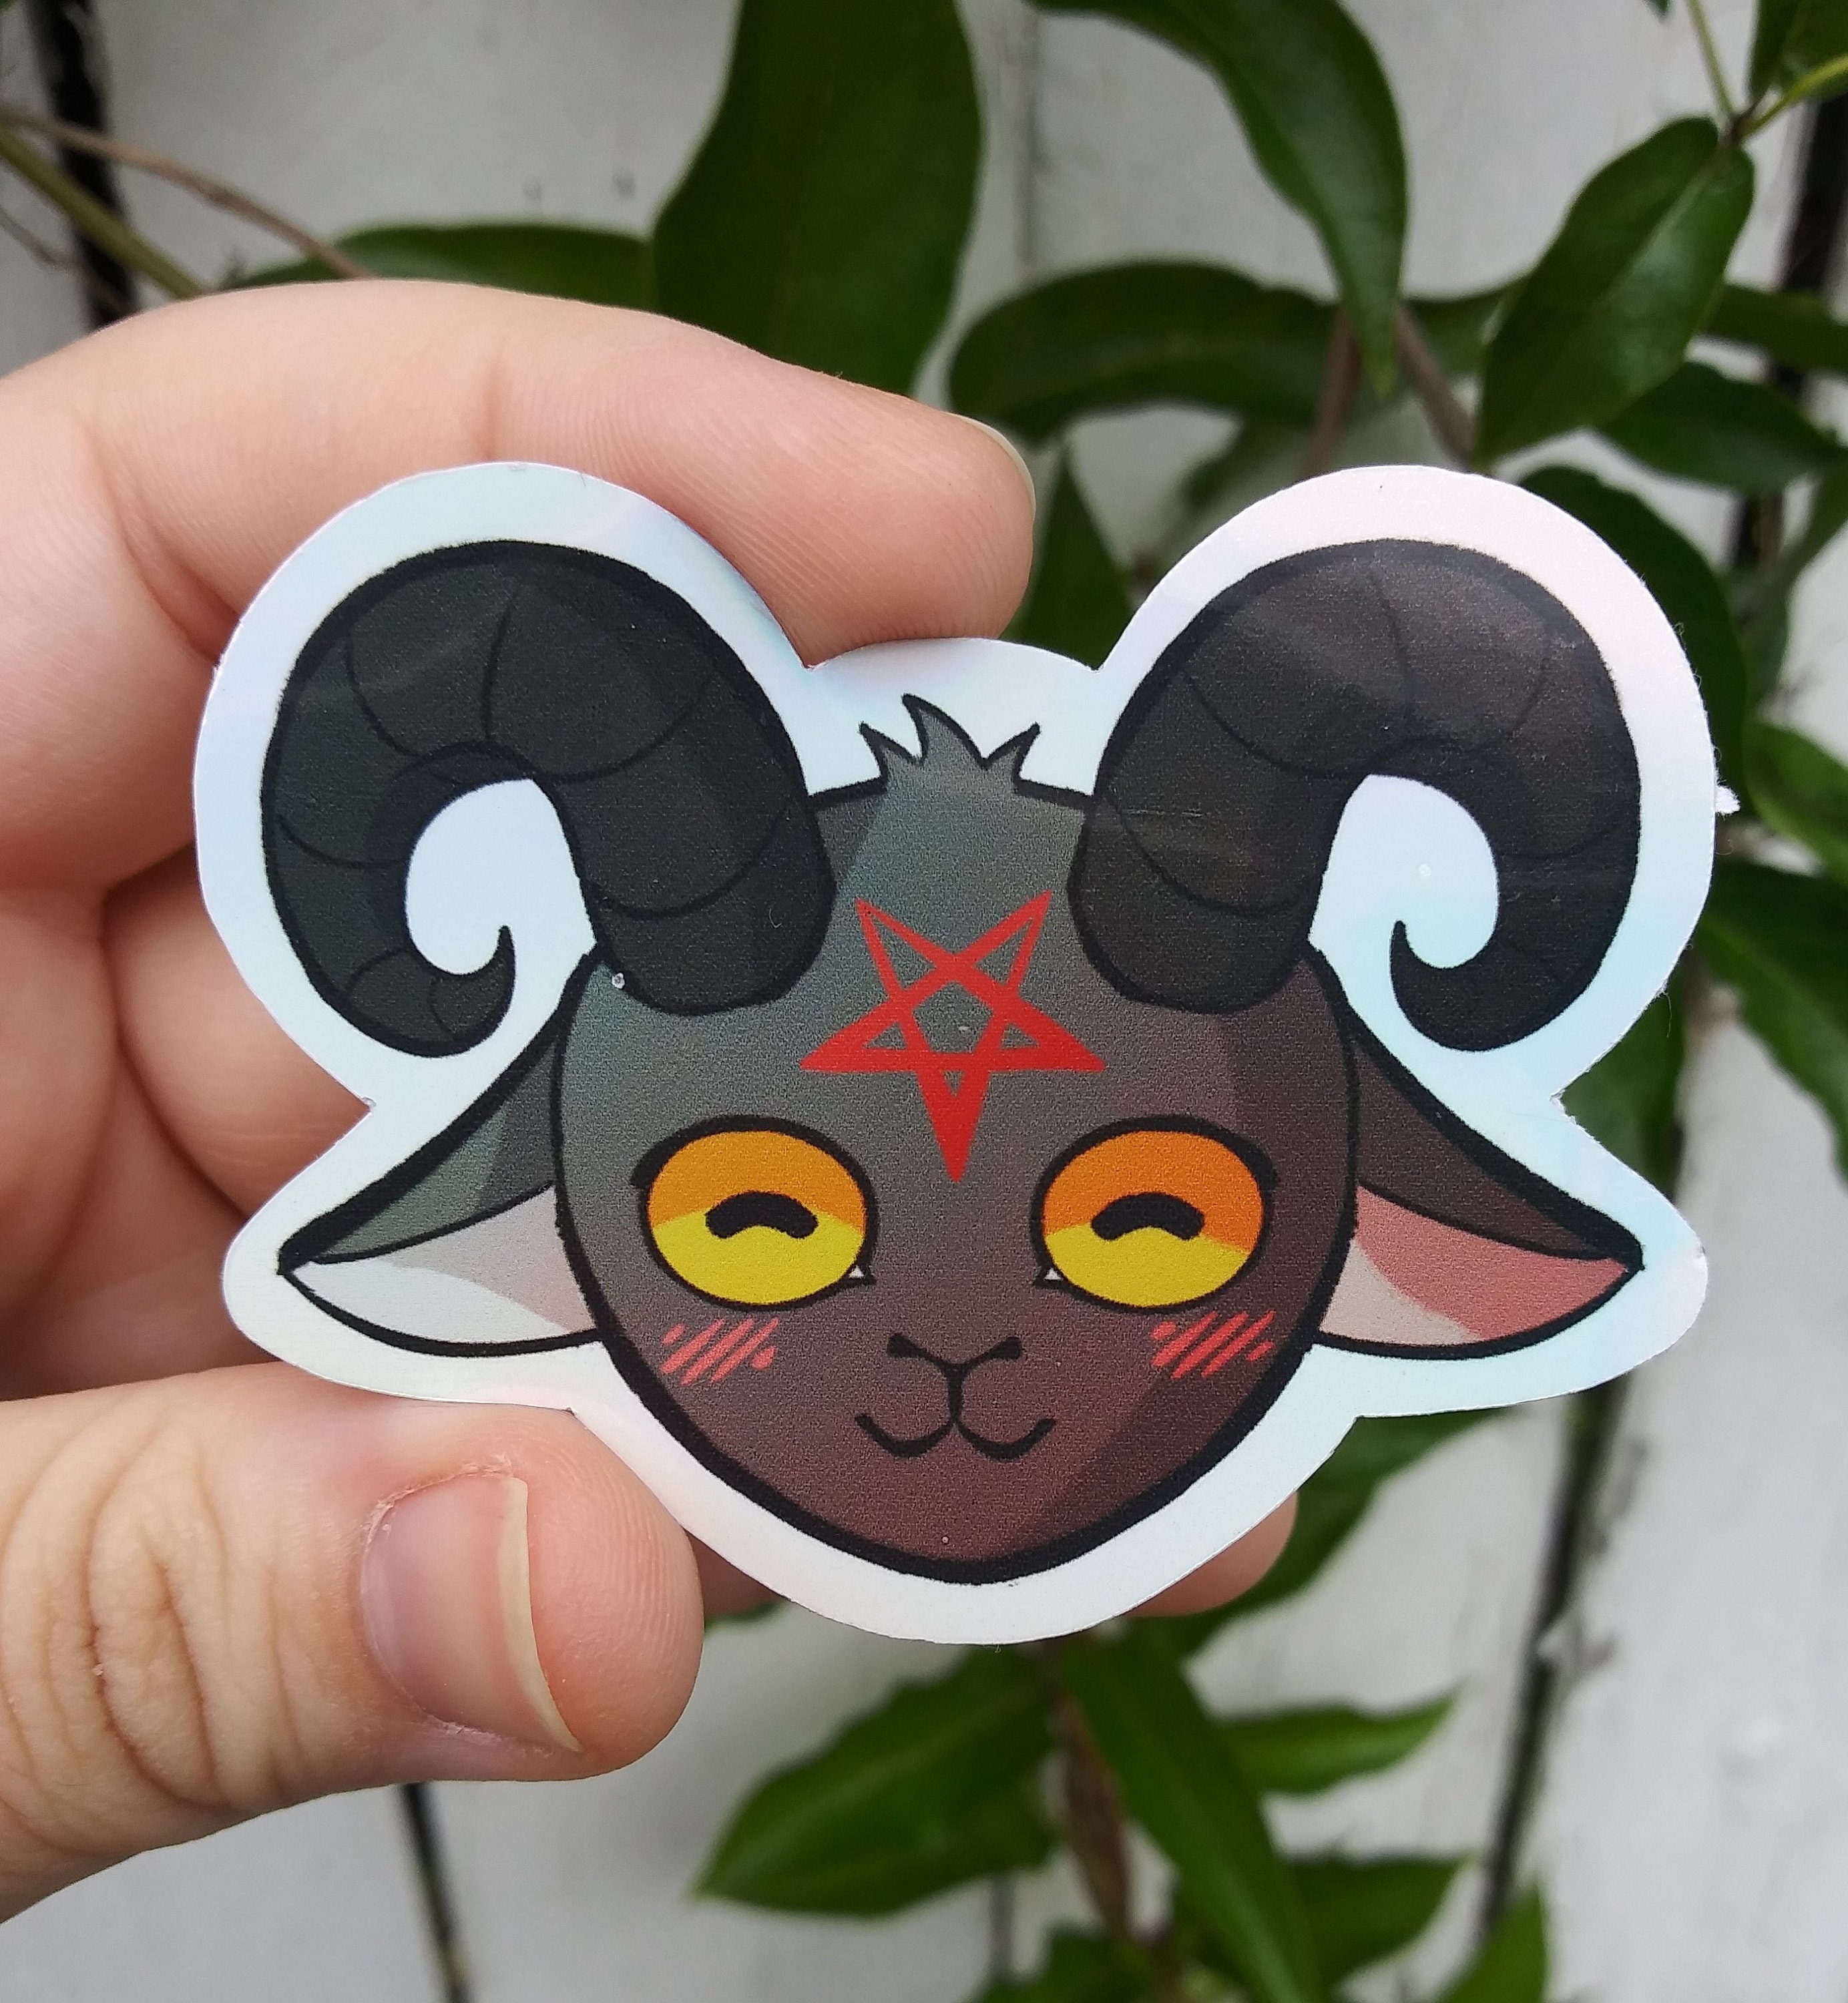 bapy Sticker for Sale by moony221b